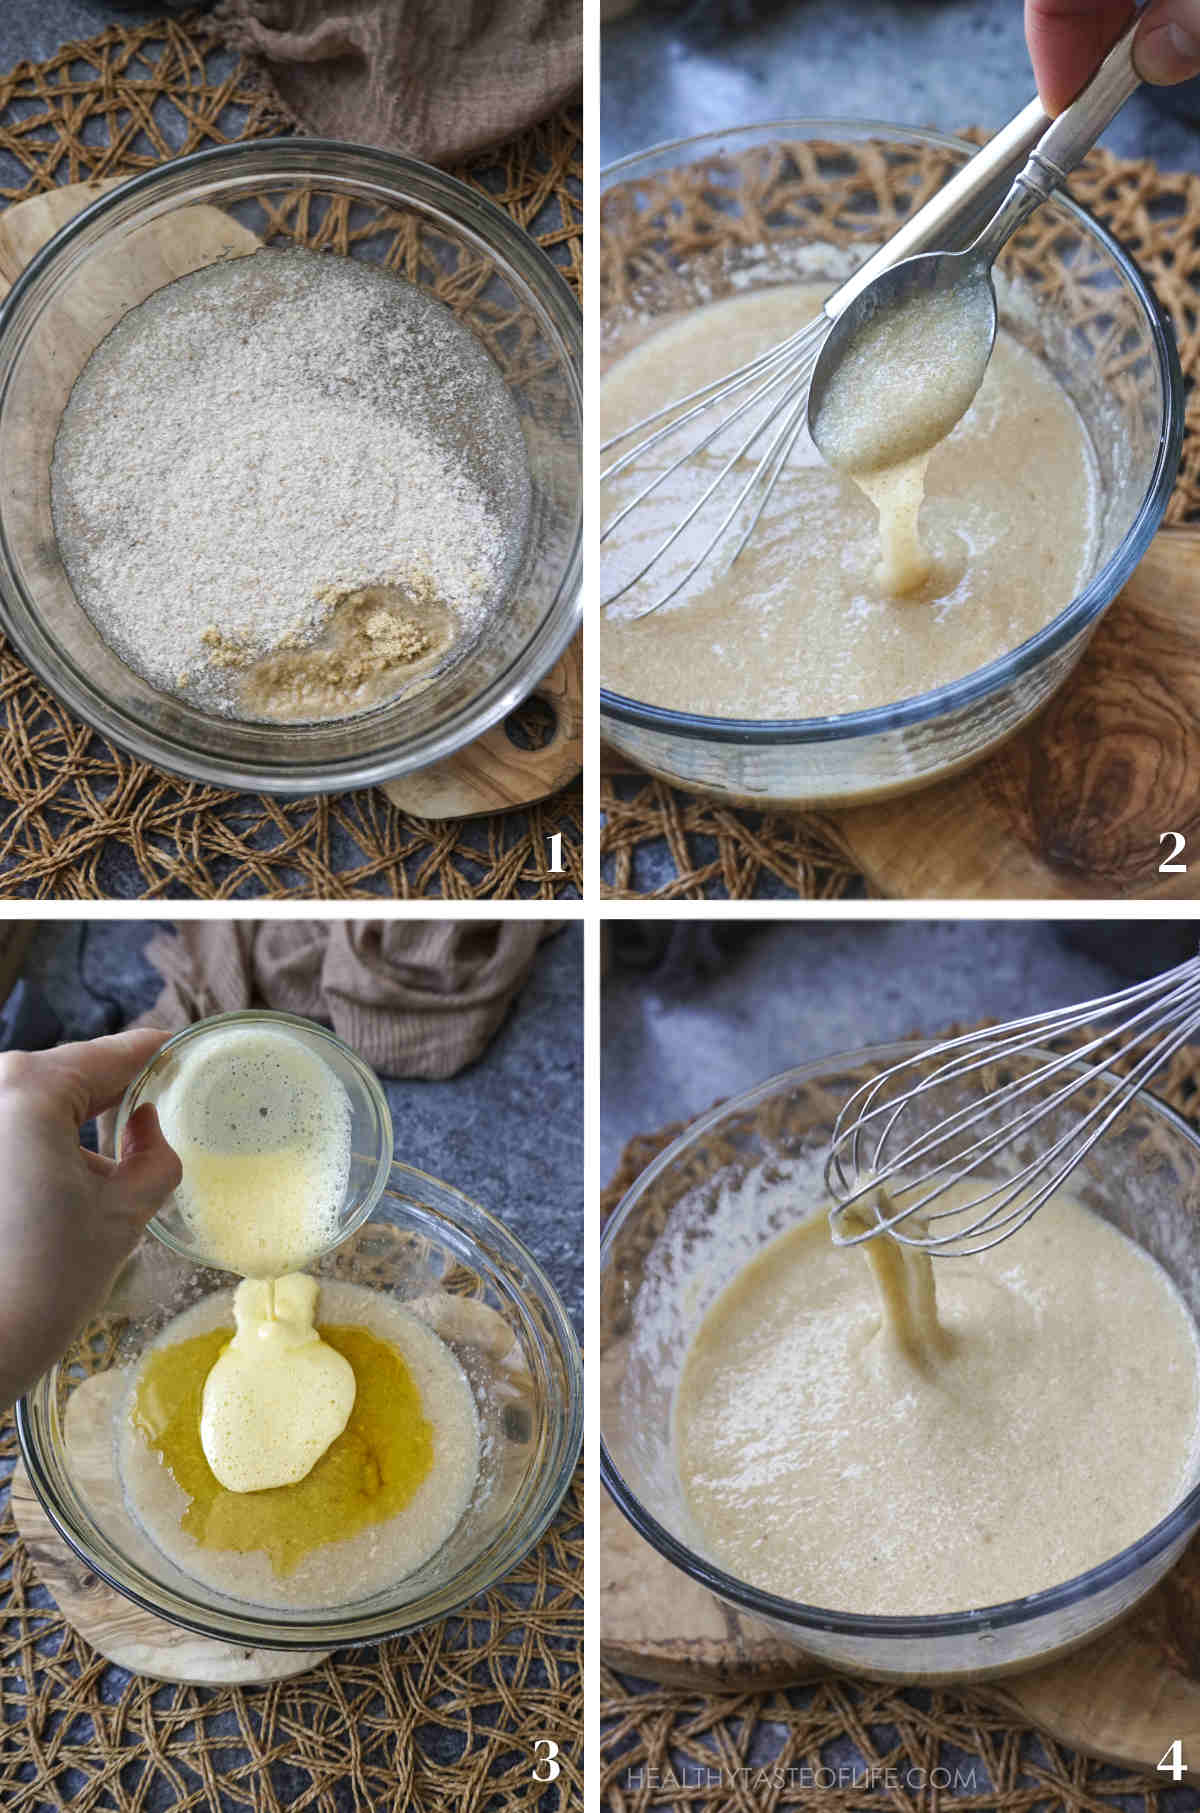 Process shots showing how to combine all wet ingredients with psyllium husk and ground flax seeds to get a gel like consistency for the dough.